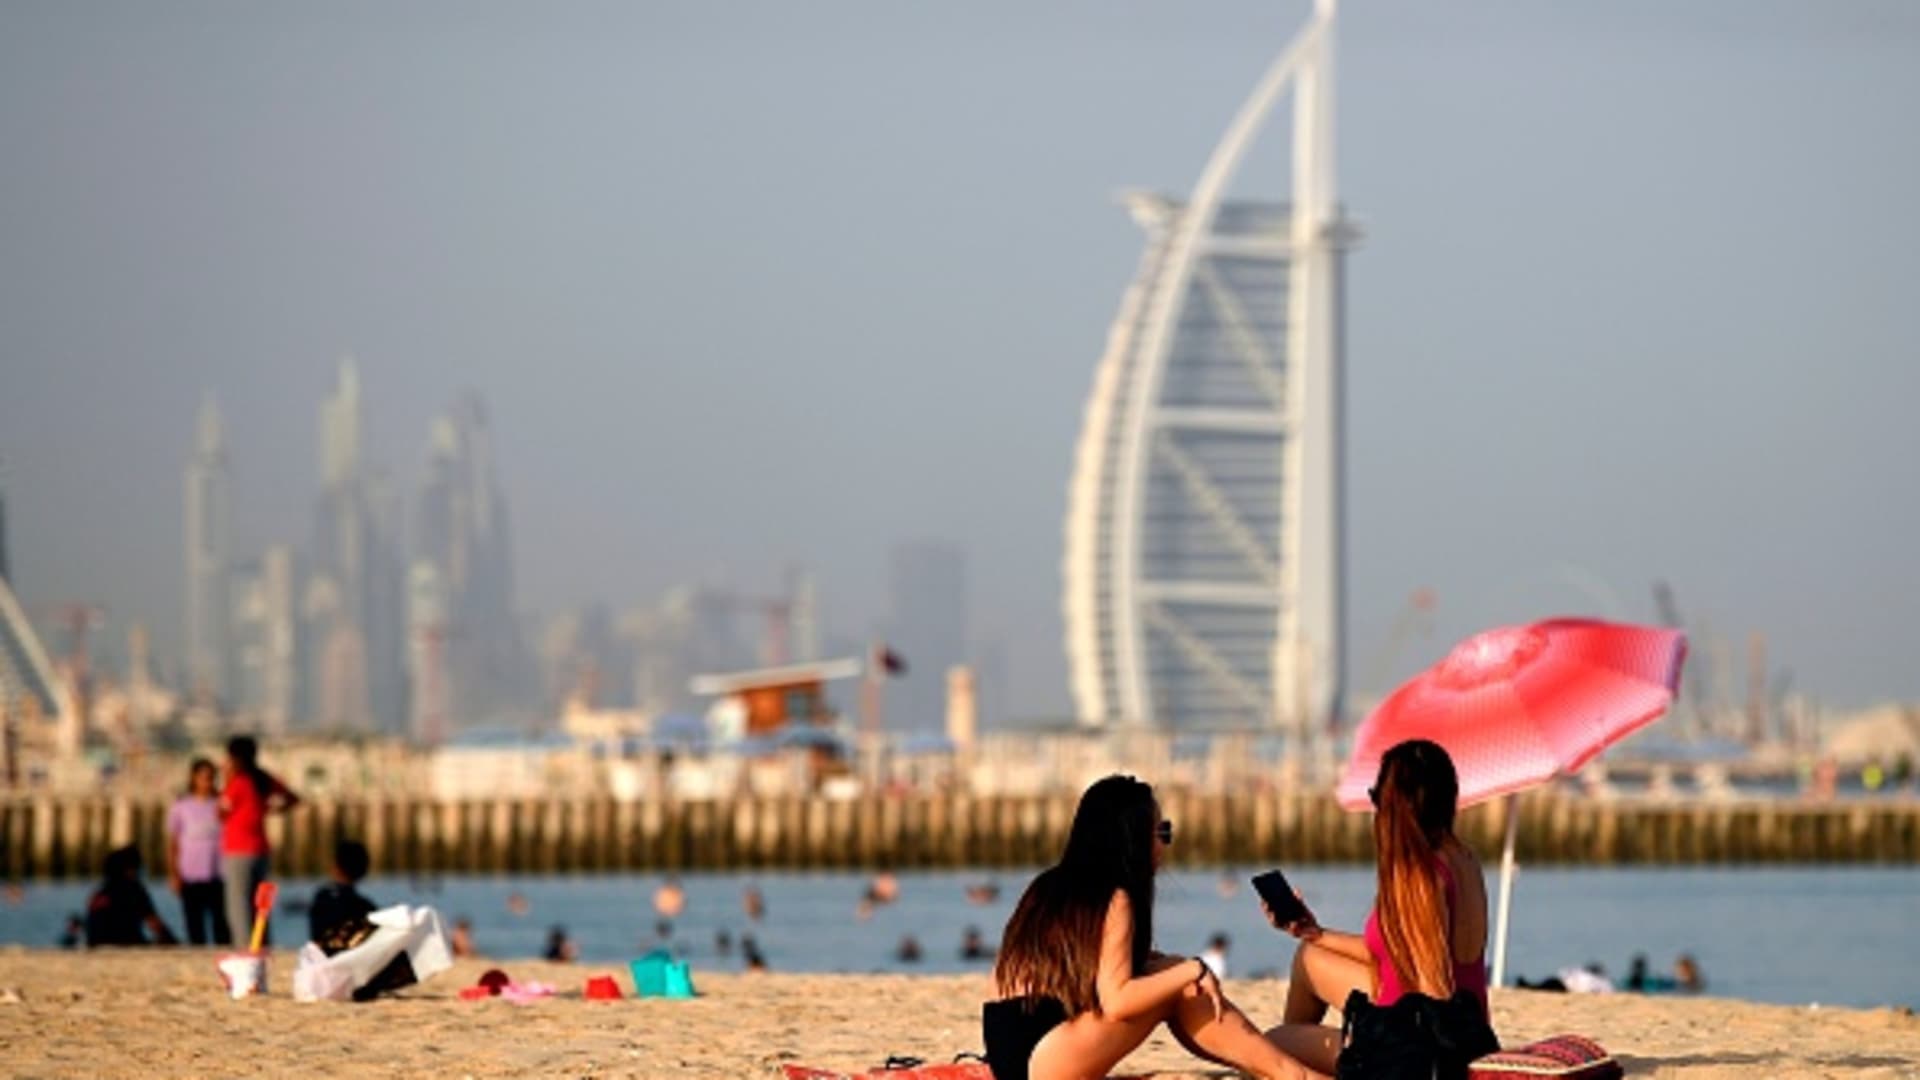 Woman sunbathers sit along a beach in the Gulf emirate of Dubai on July 24, 2020, while behind is seen the Burj al-Arab hotel. After a painful four-month tourism shutdown that ended earlier in July, Dubai is billing itself as a safe destination with the resources to ward off coronavirus.